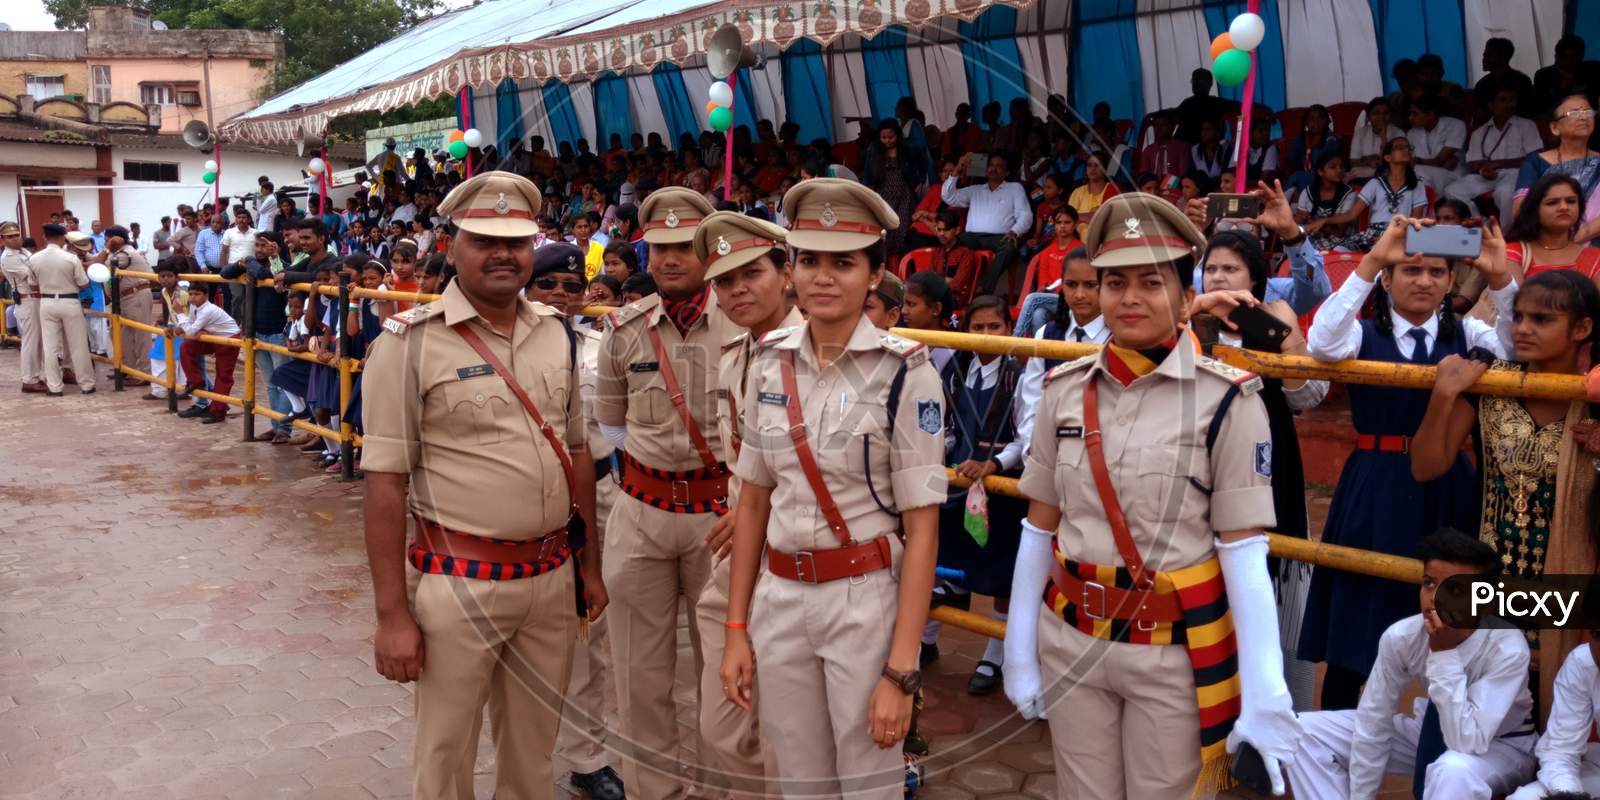 Asian Police On National Event.